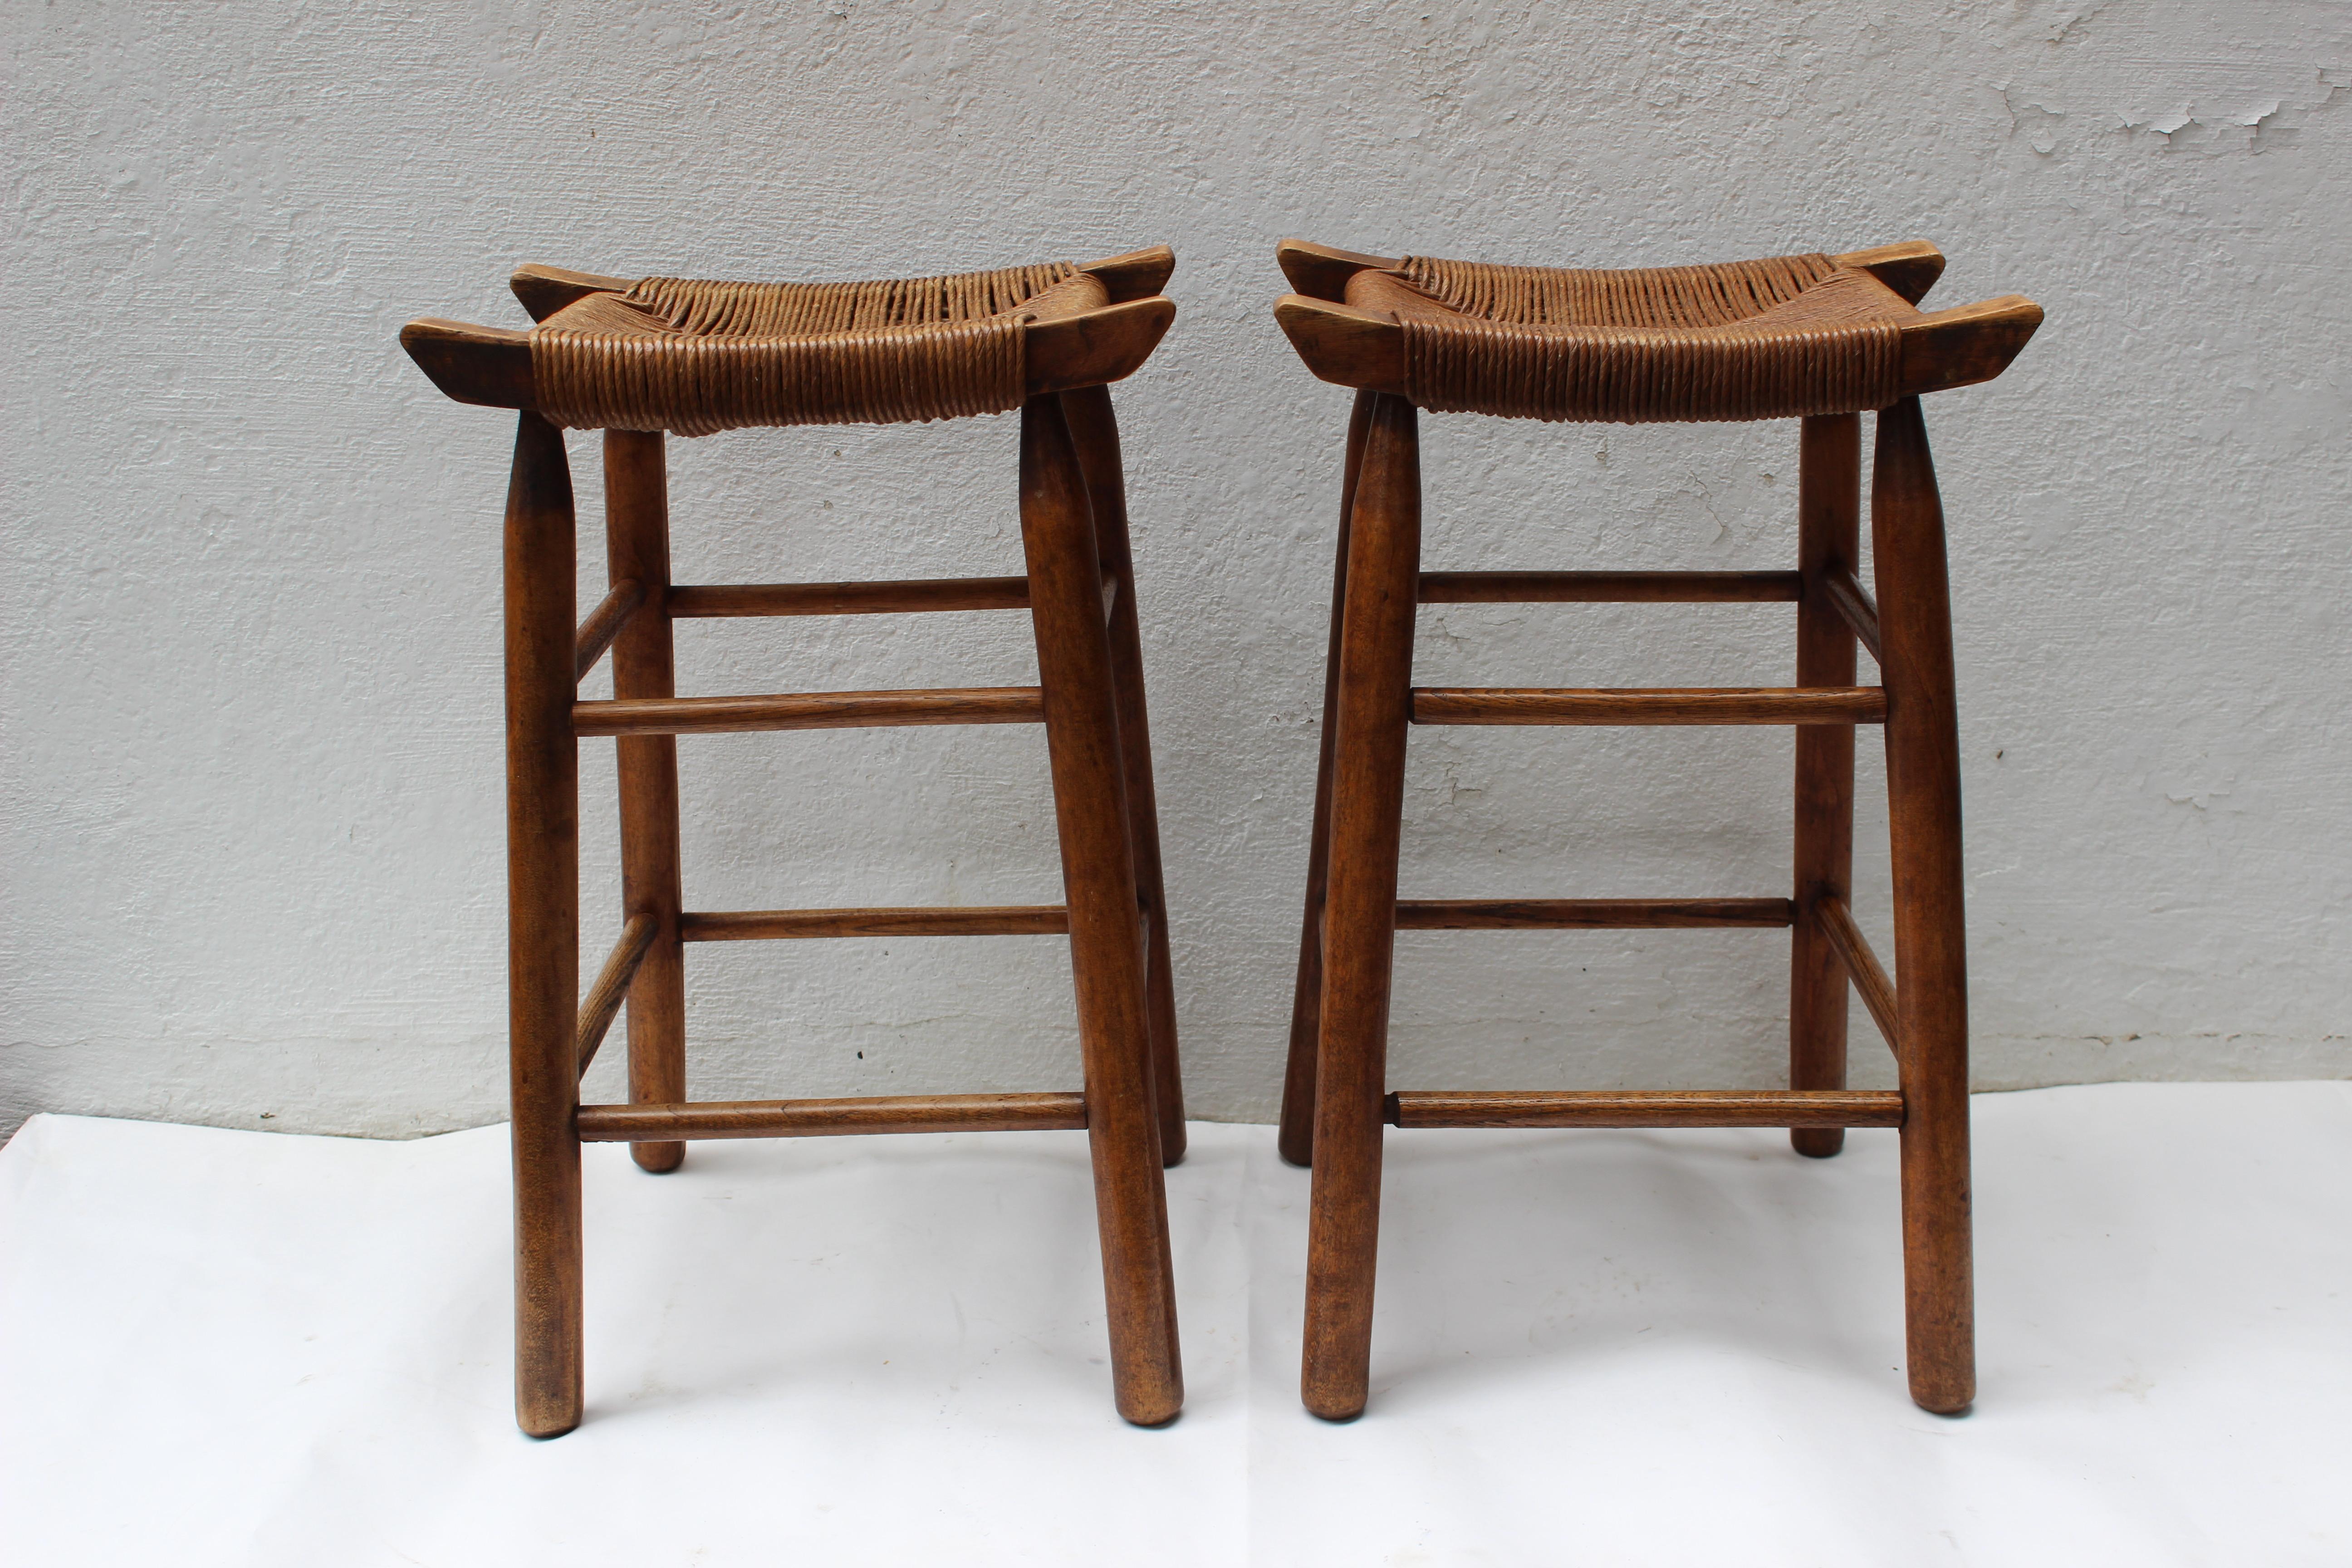 Set of four Charlotte Perriand style wood stools with rush seats.